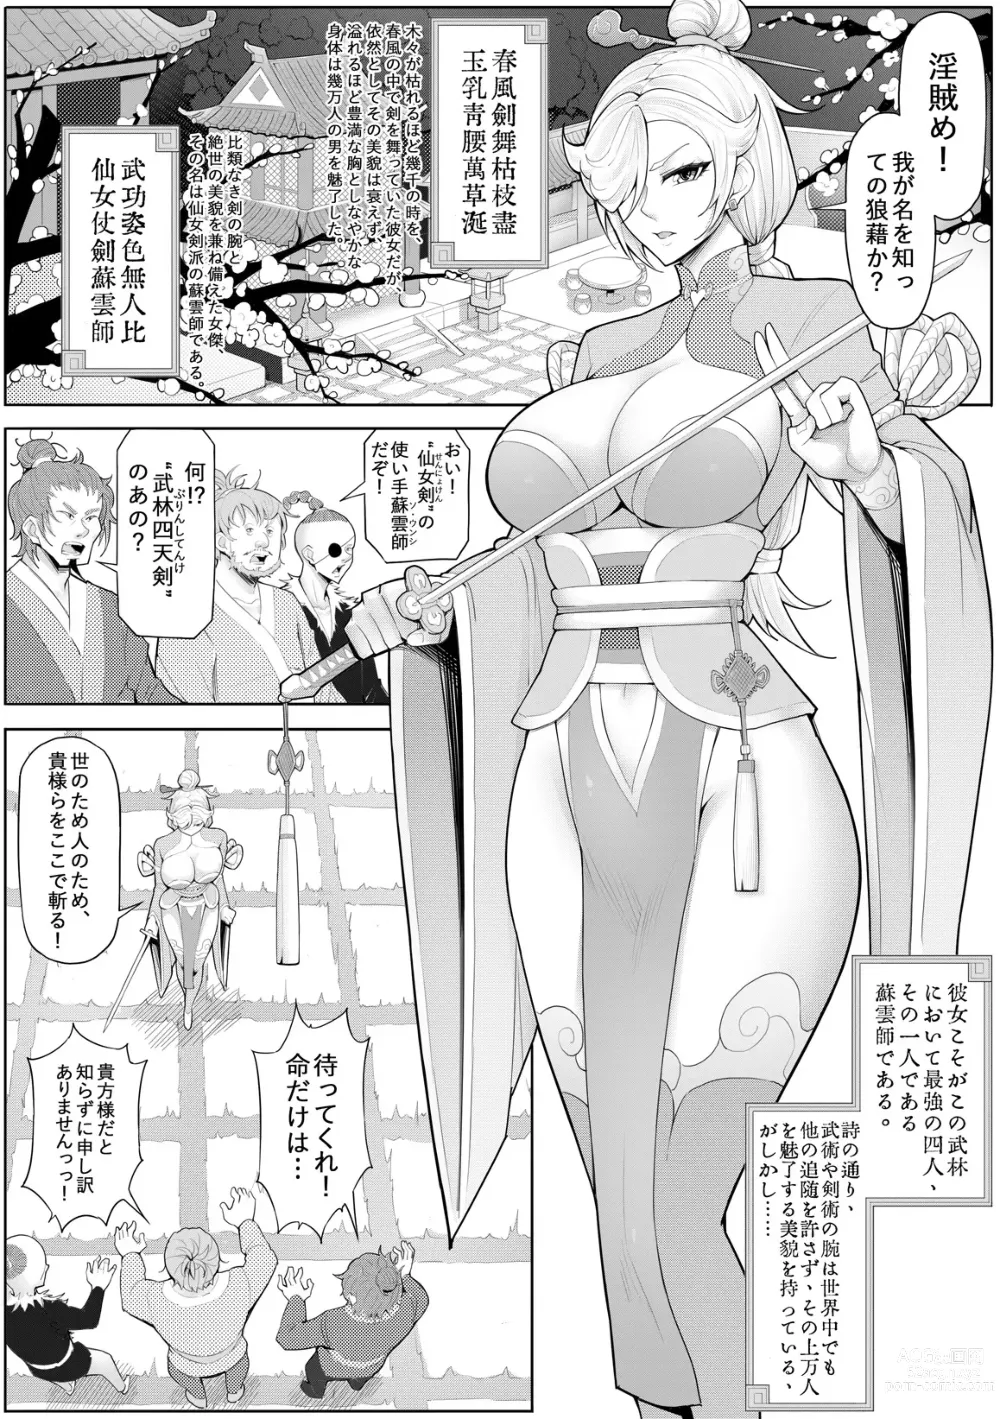 Page 54 of doujinshi Skin Normal Mission 04